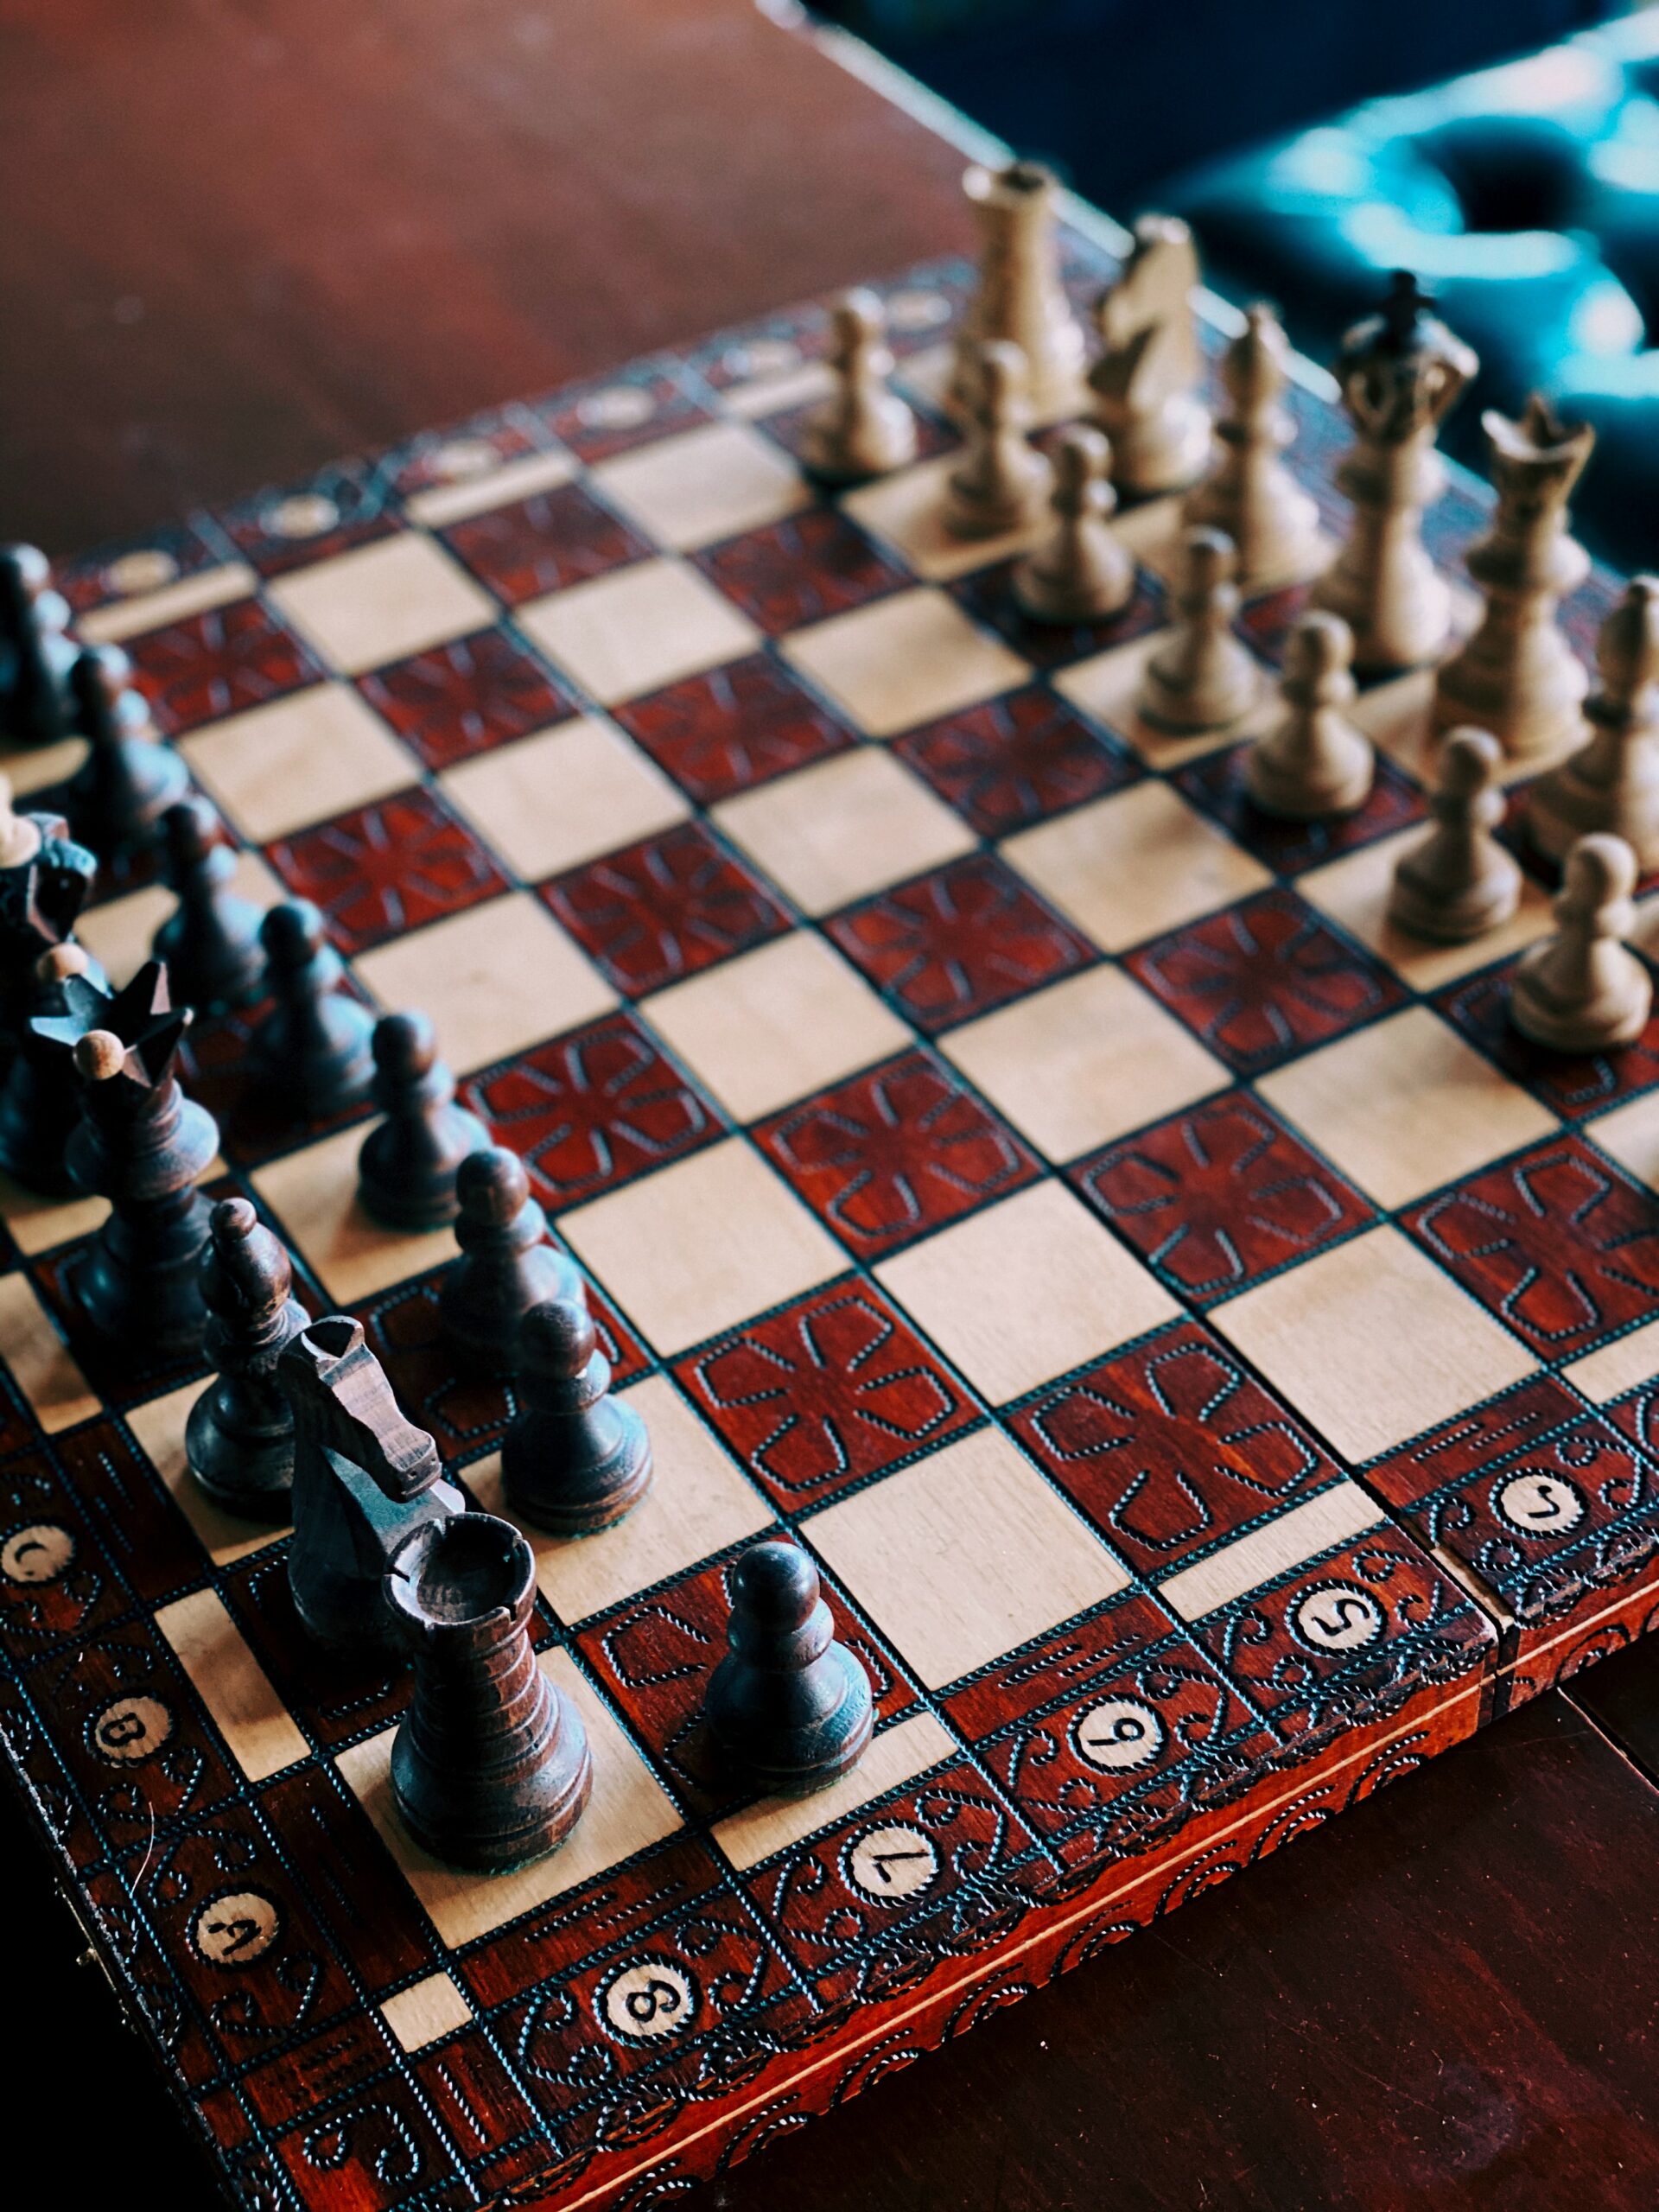 a chess board with black pieces on the left, and white pieces on the right